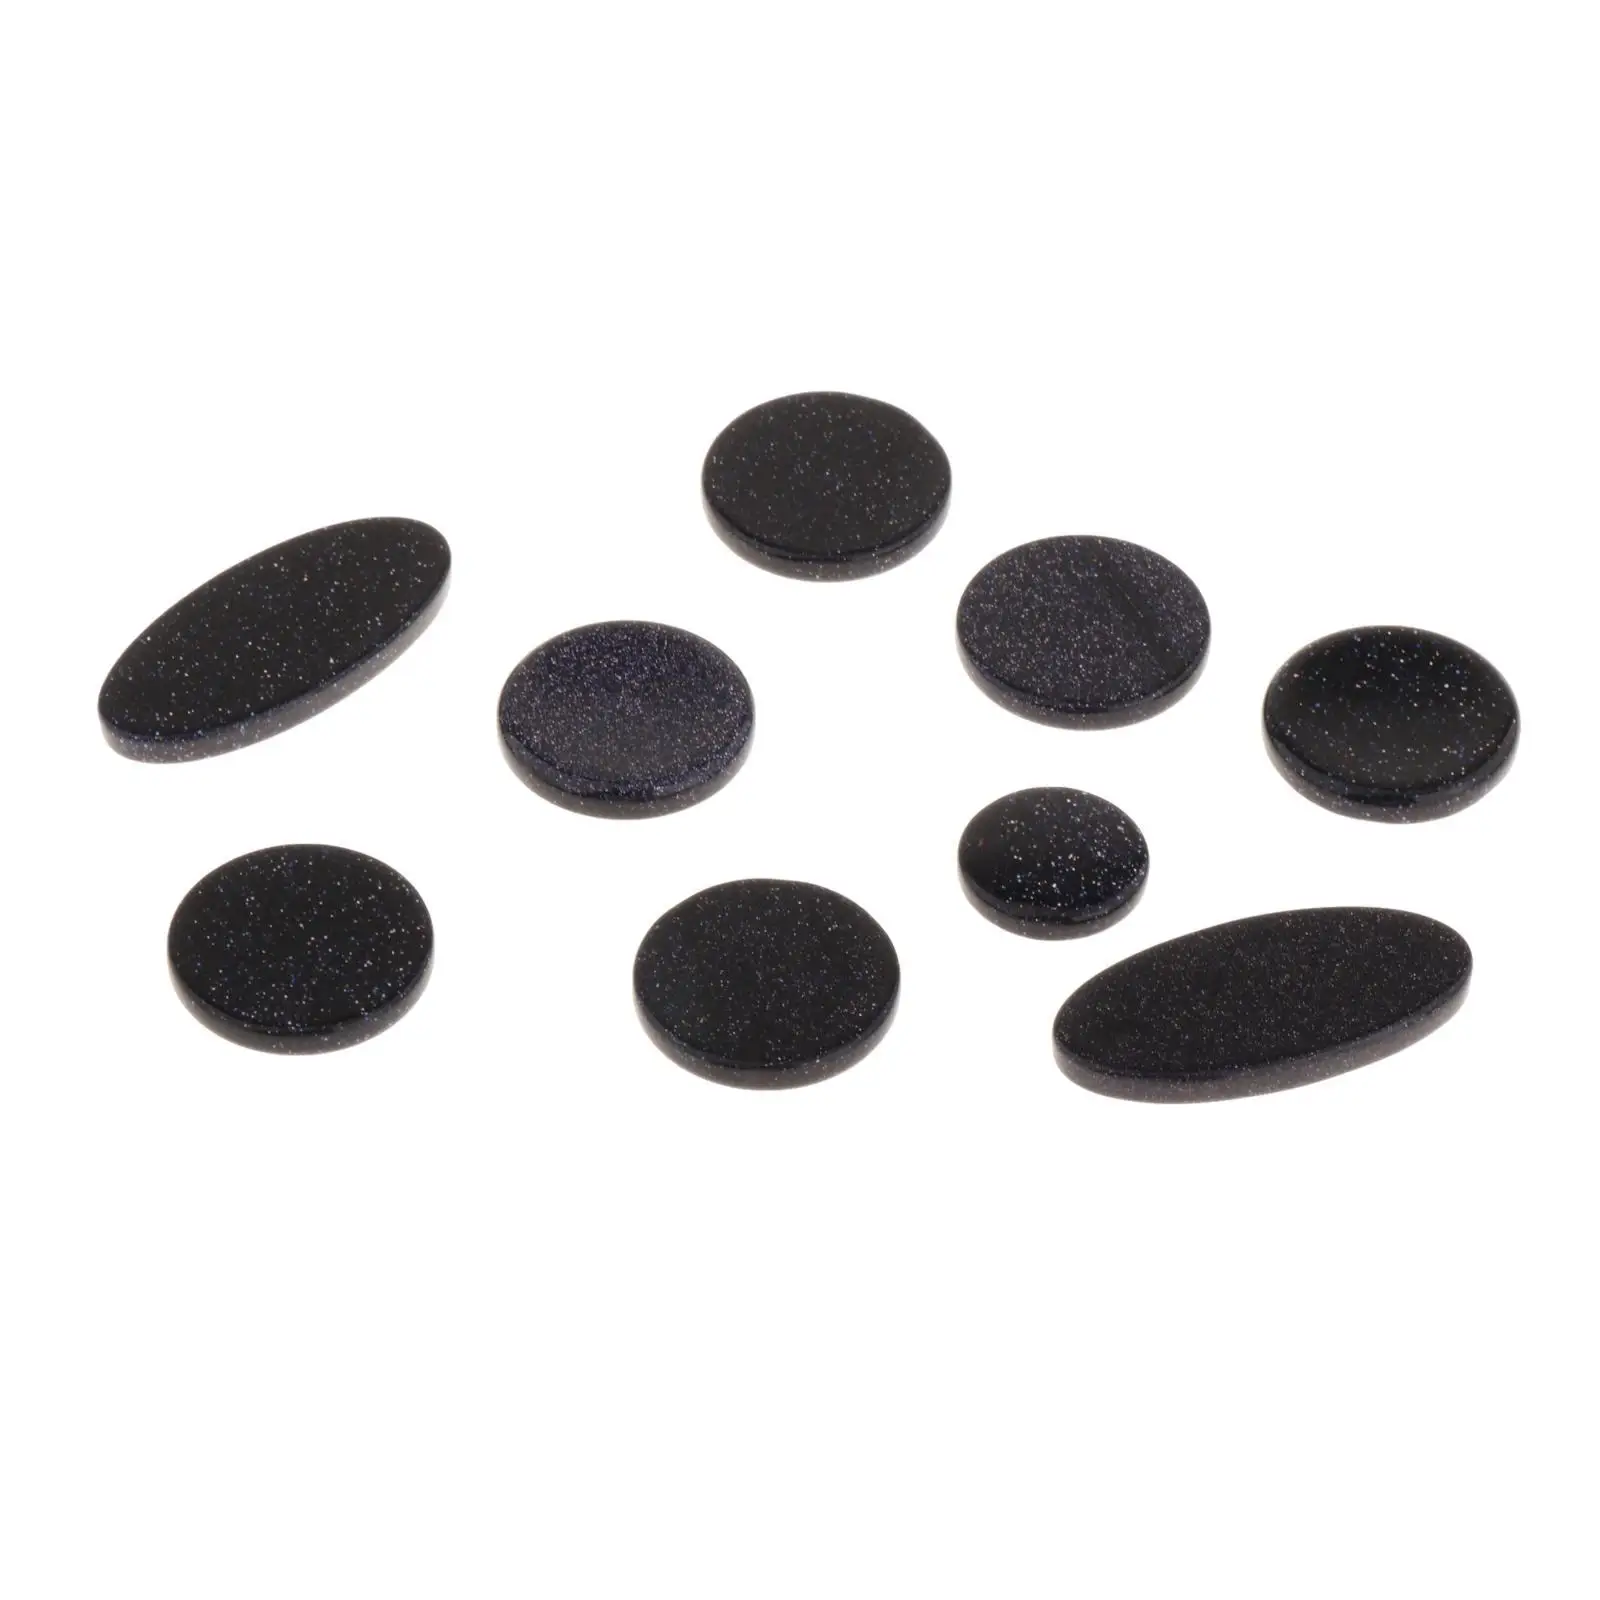 Sax Finger Buttons Replace Musical Instruments Accessory Exquisite Bright Color Inlays Accessory Parts for Alto Tenor Soprano